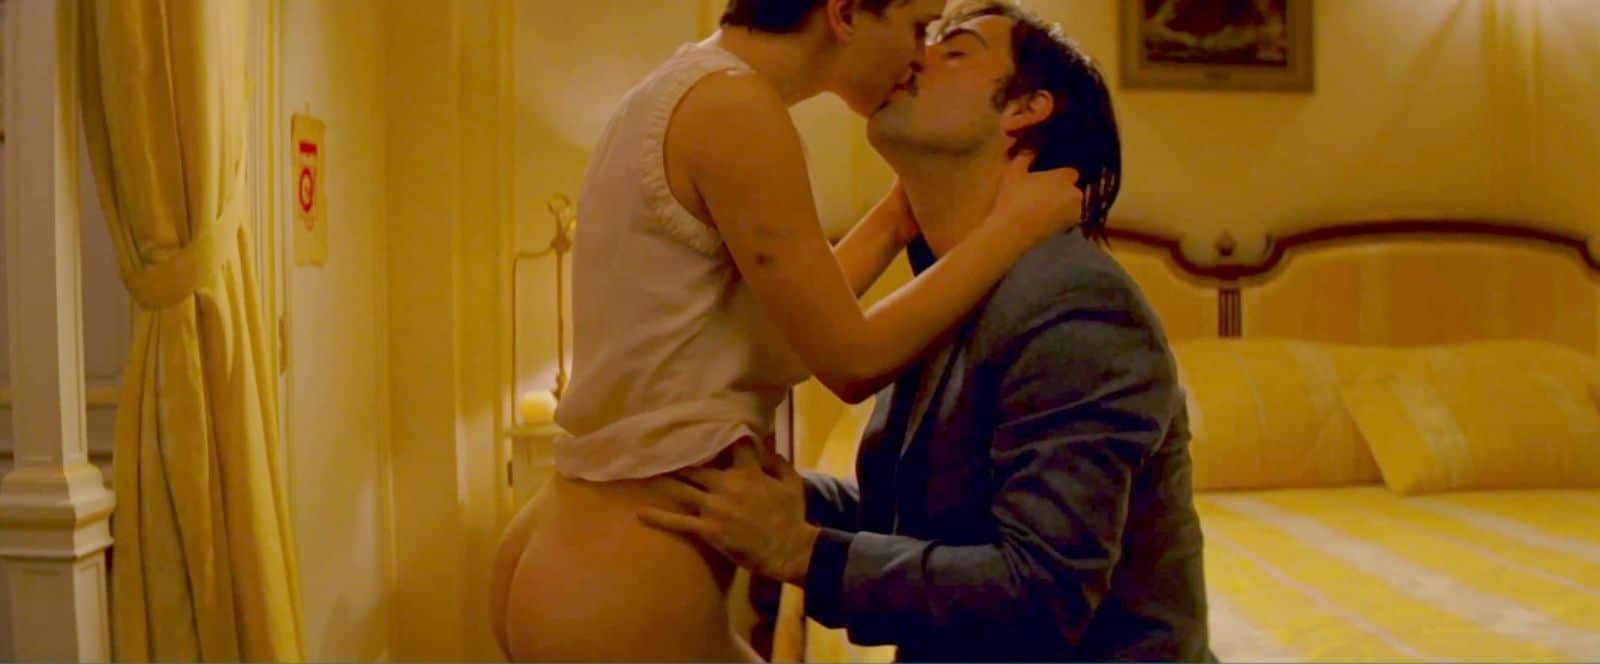 sexy natalie portman ass naked in wes anderson movie scene